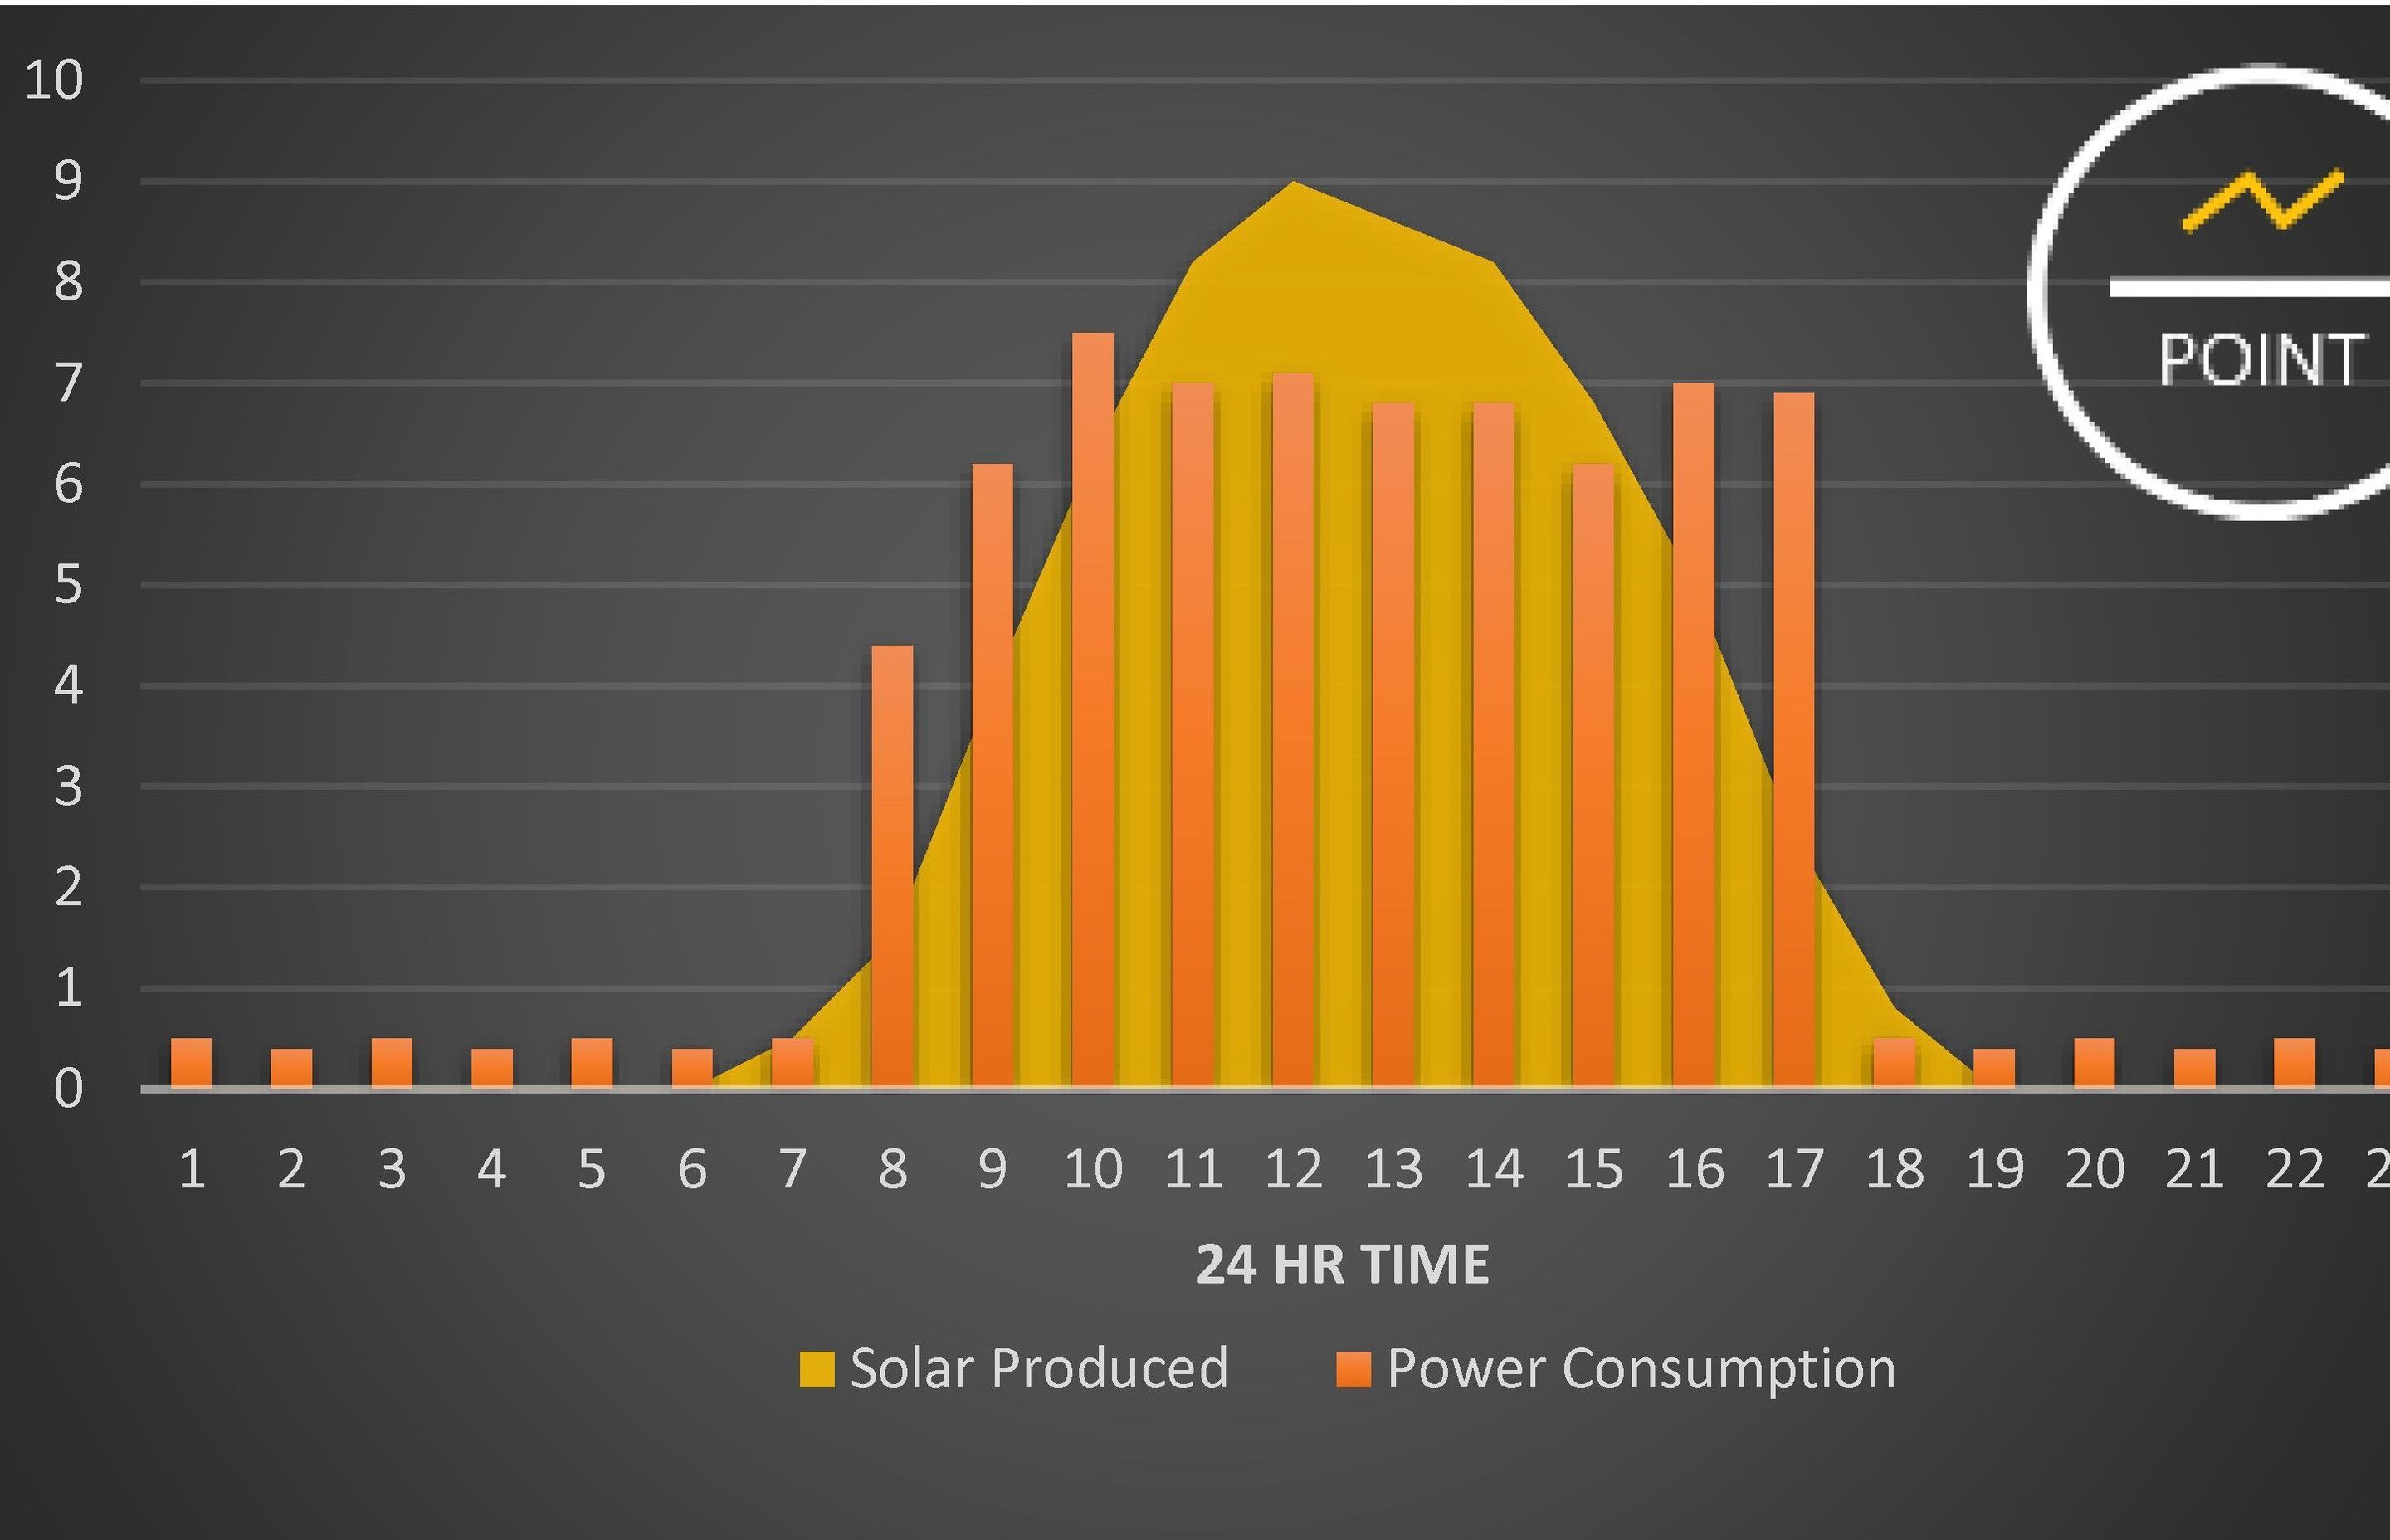 Daily energy consumption levels of a small business using a 10kW solar system